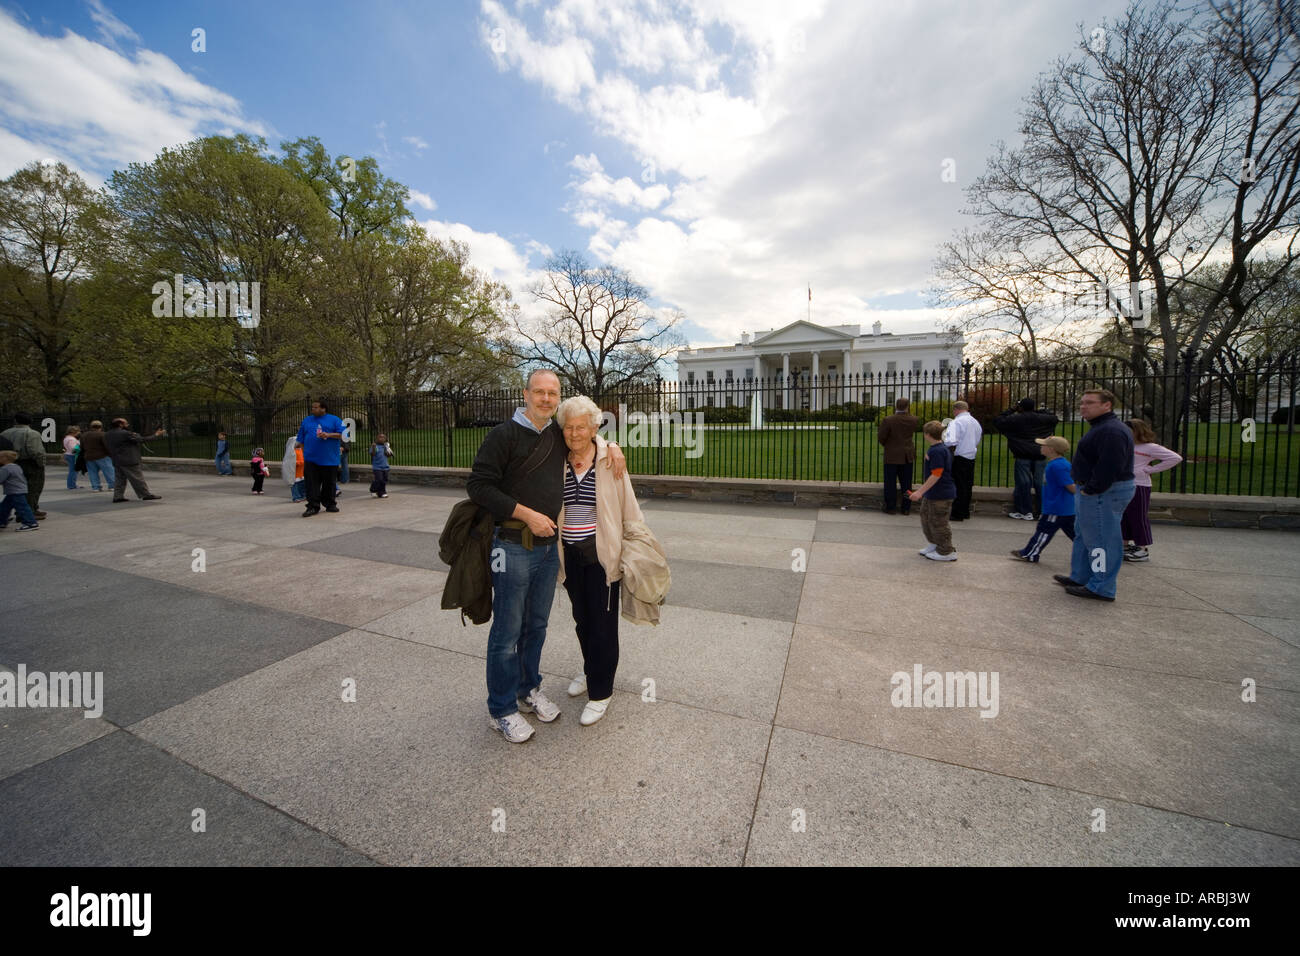 Elderly tourists from Europe posing in front of the White House, Penn Ave Washington DC. Stock Photo